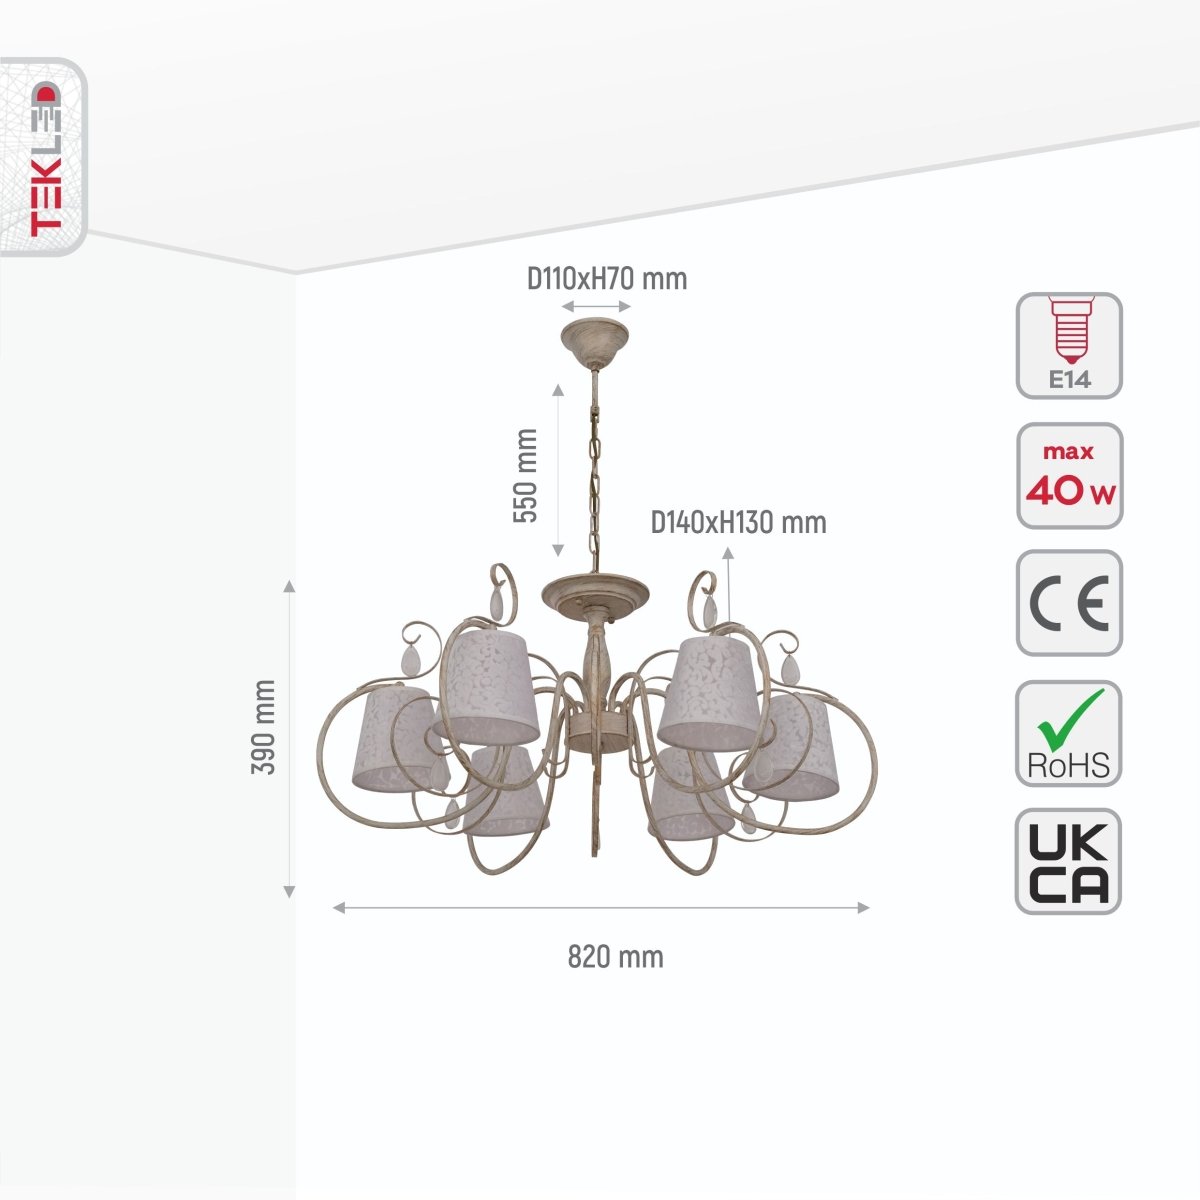 Size and specs of Creamy White Shade Rice White Gold Brushed 6 Arm Chandelier with 6xE14 Fitting | TEKLED 158-17822